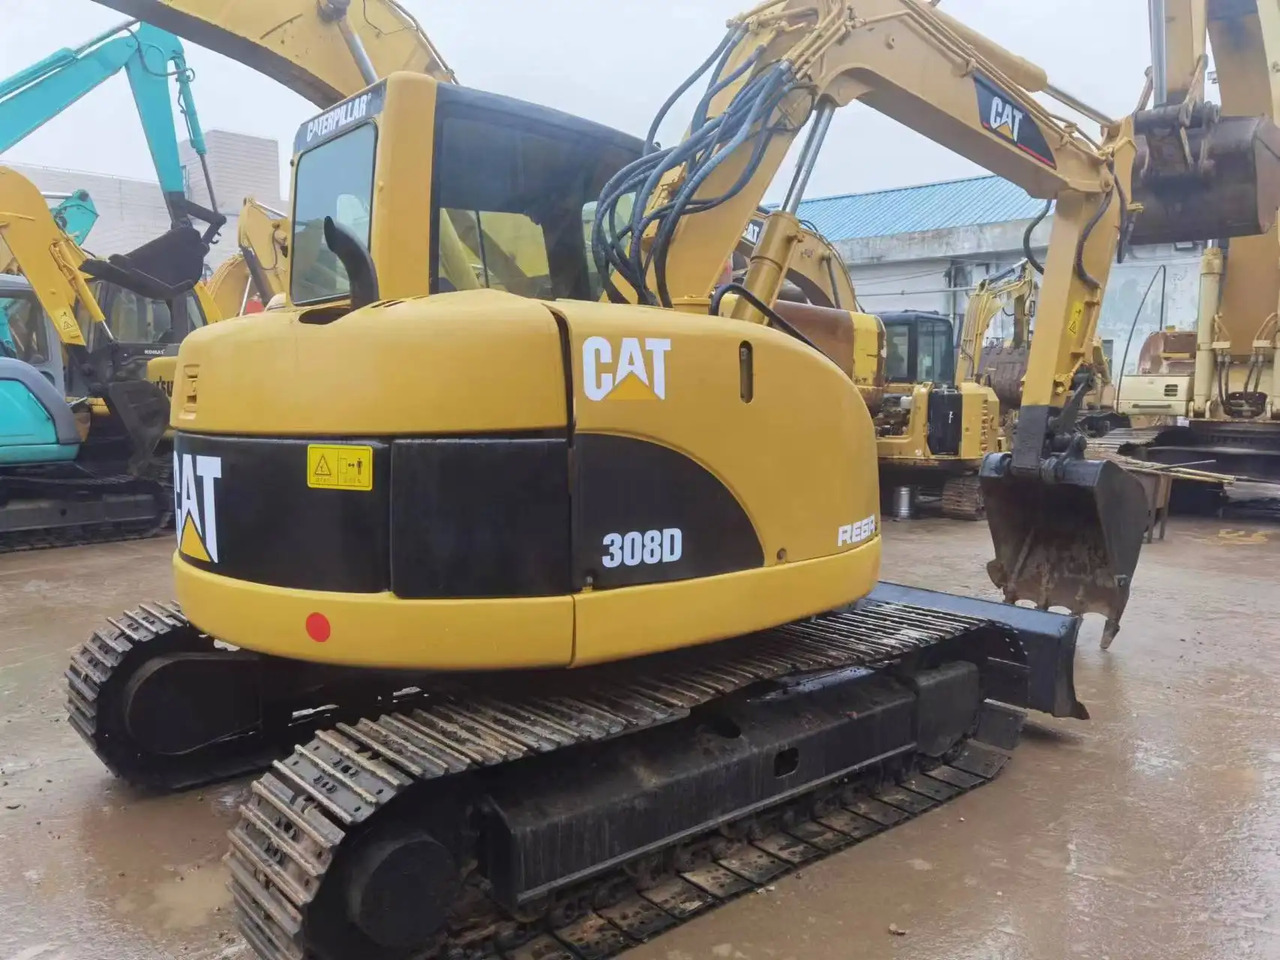 Used Factory Stock  Cat 308d Mini 308D Small Digger Cater Excavator in good condition finansal kiralama Used Factory Stock  Cat 308d Mini 308D Small Digger Cater Excavator in good condition: fotoğraf 3